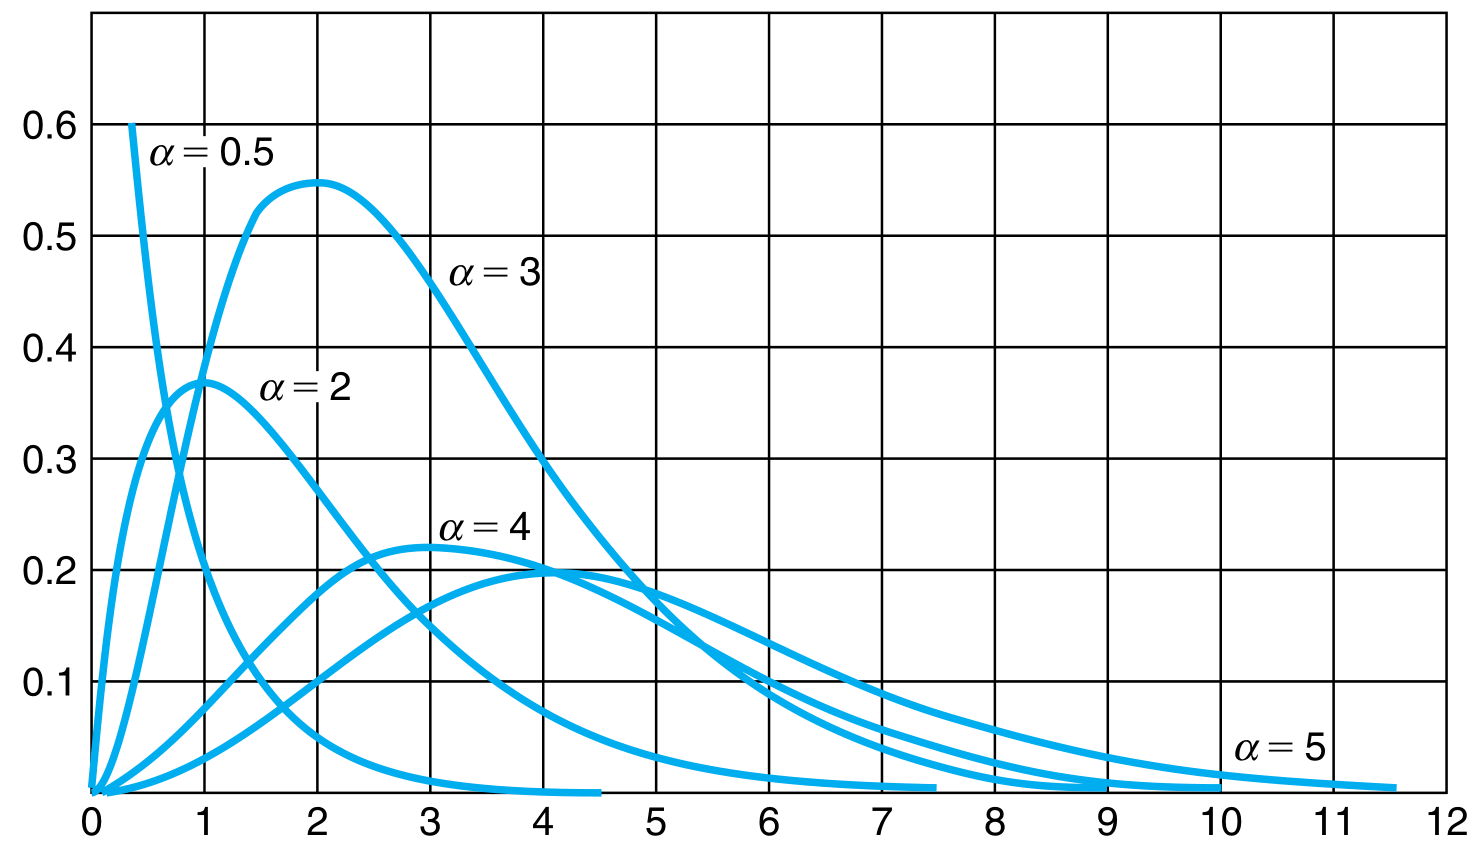 Gamma distribution for $\lambda = 1$ and different values of $\alpha$